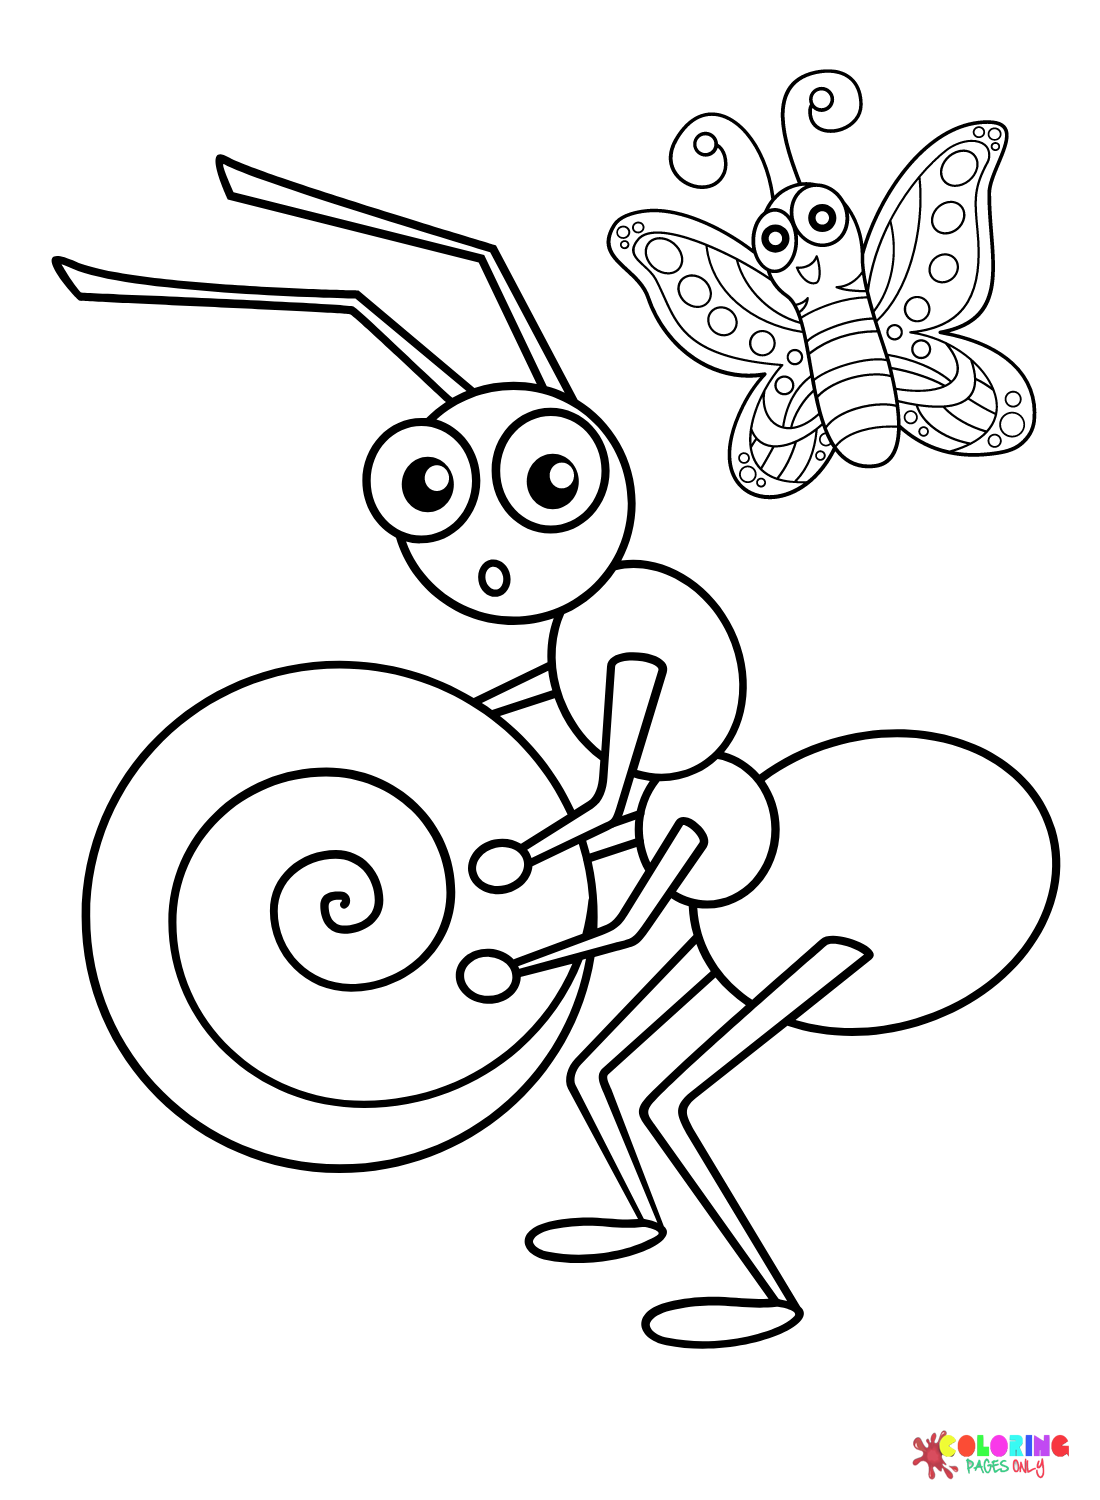 Ant Holding Candy Coloring Page